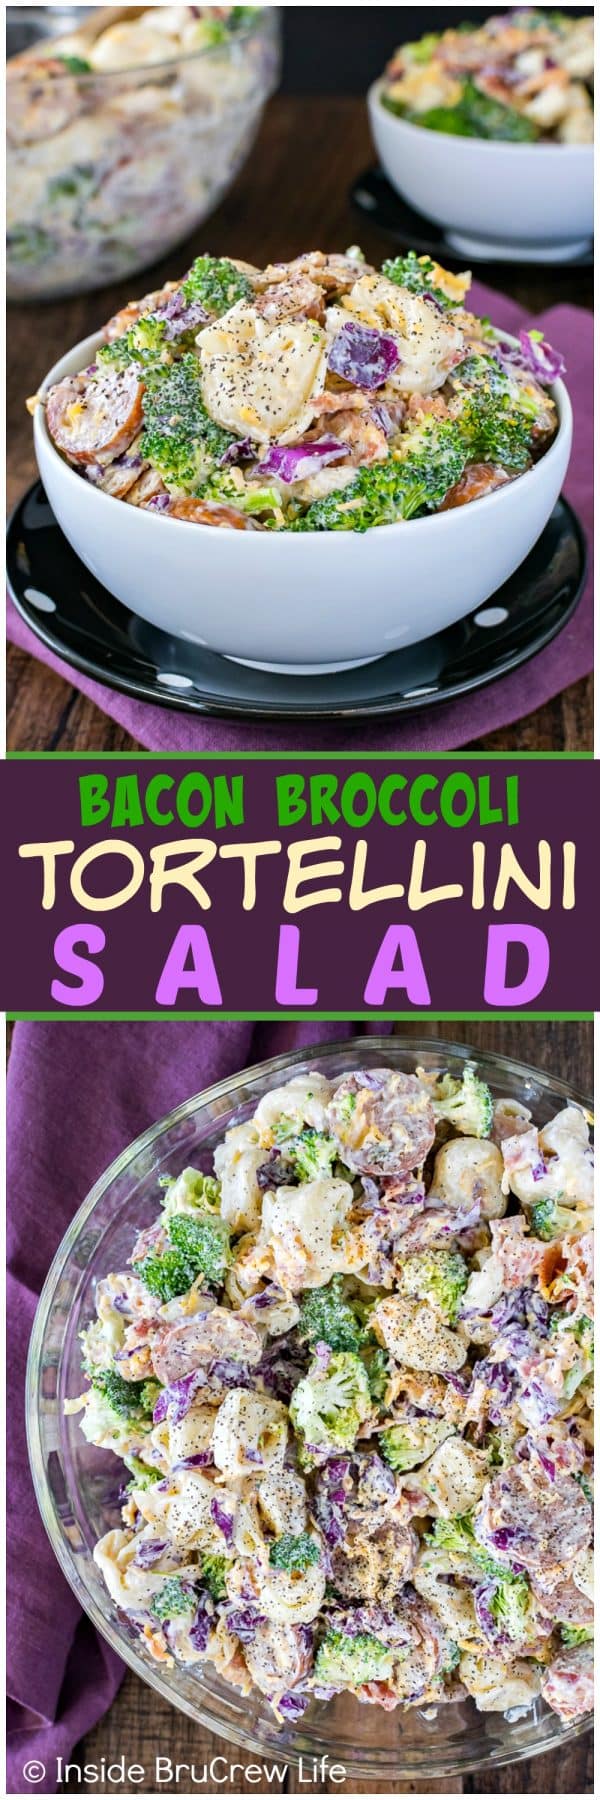 Bacon Broccoli Tortellini Salad - cheese filled pasta, veggies, and meats make this pasta salad recipe a great dish for summer dinners or picnics!